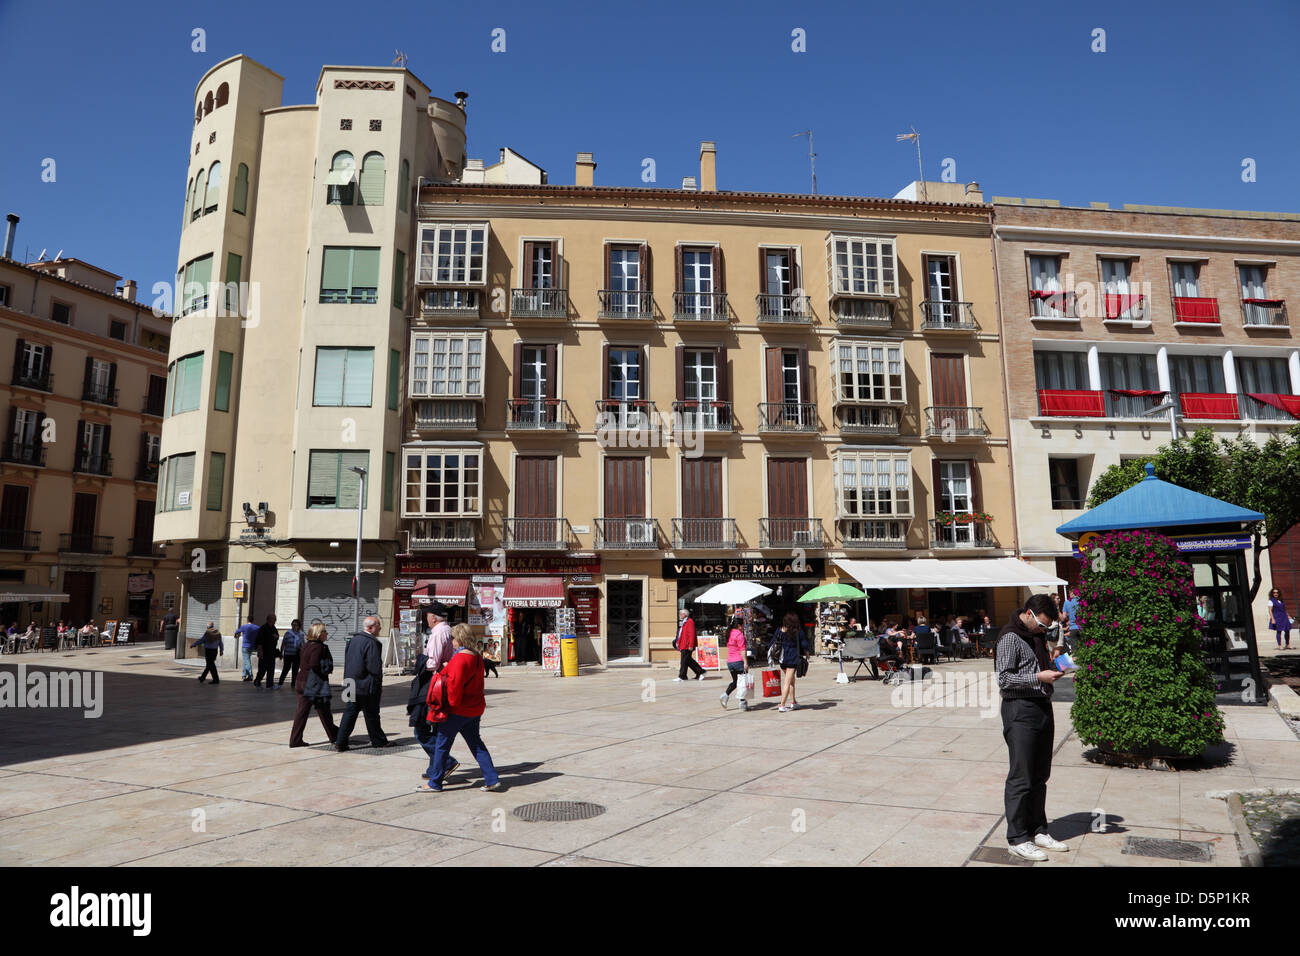 People strolling in the city of Malaga, Andalusia Spain Stock Photo